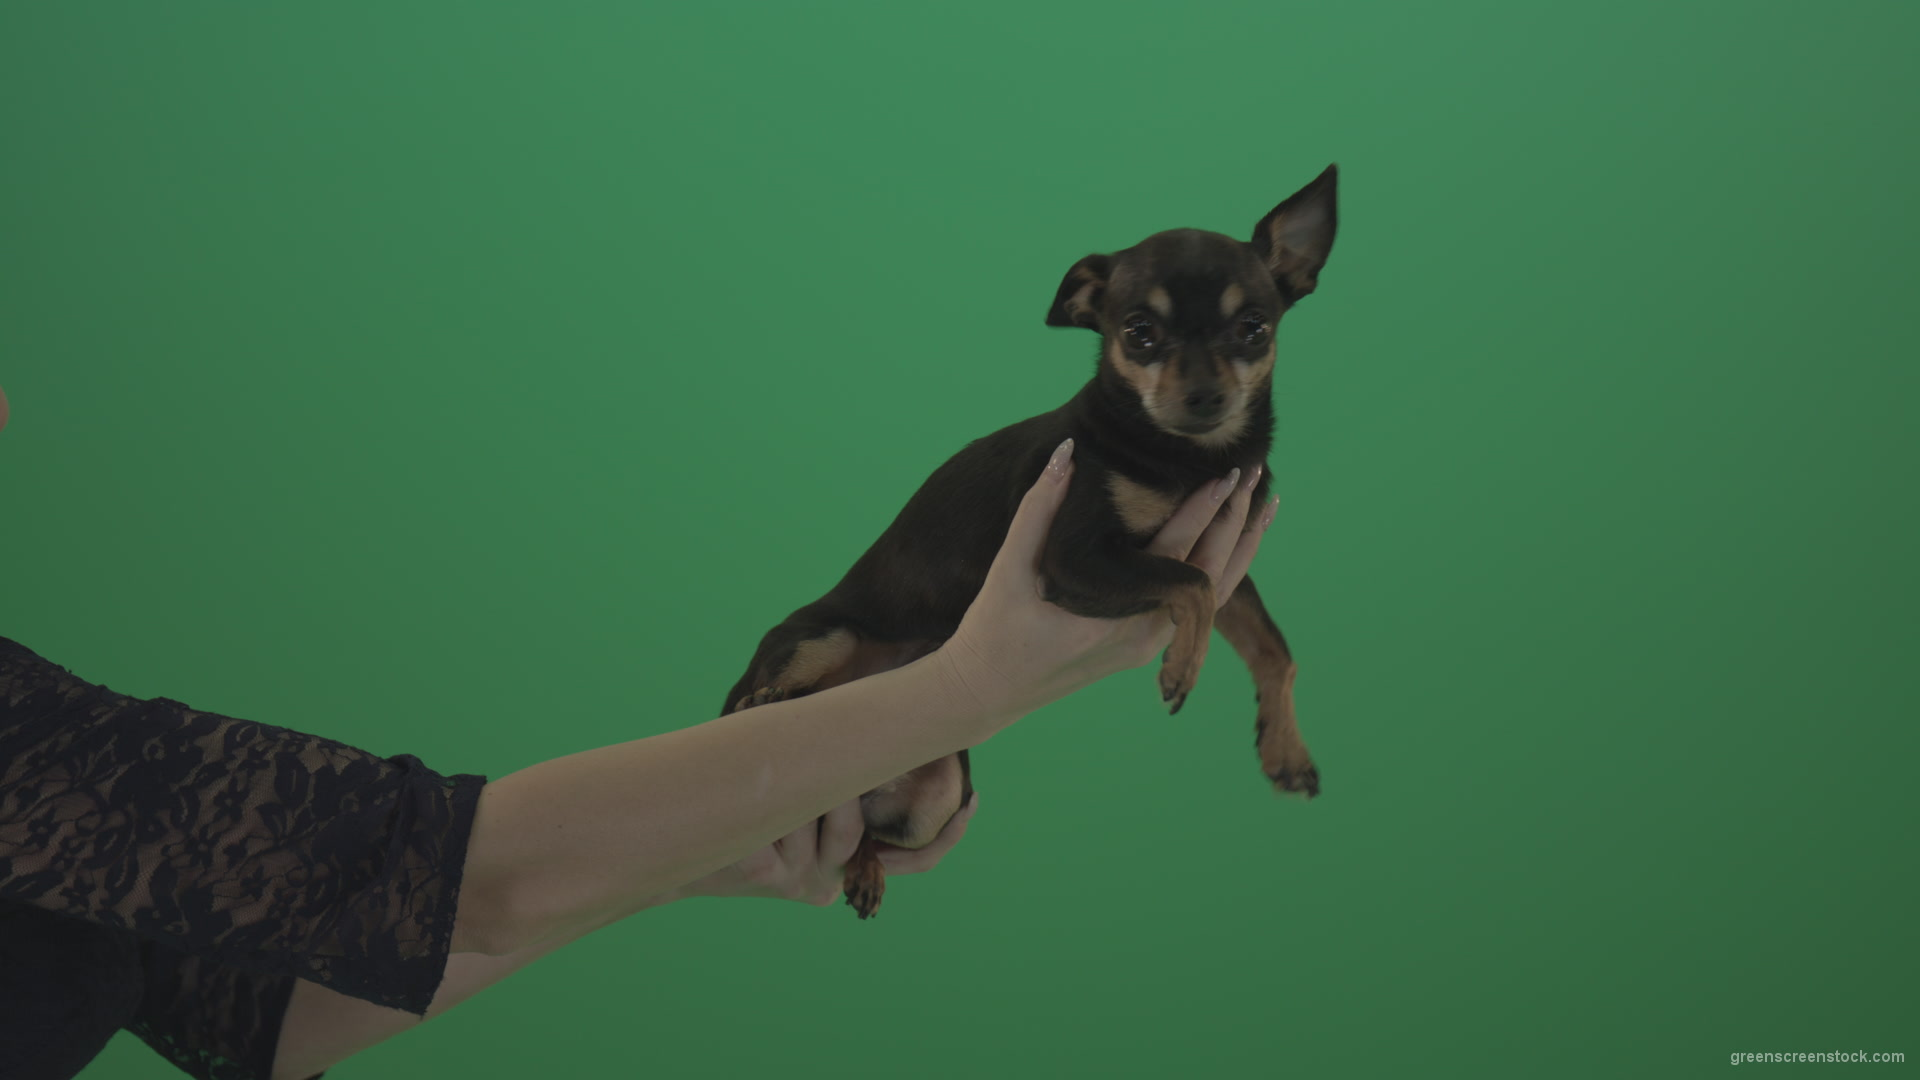 Black-funny-Chihuahua-small-dog-in-female-hands-on-green-screen_004 Green Screen Stock